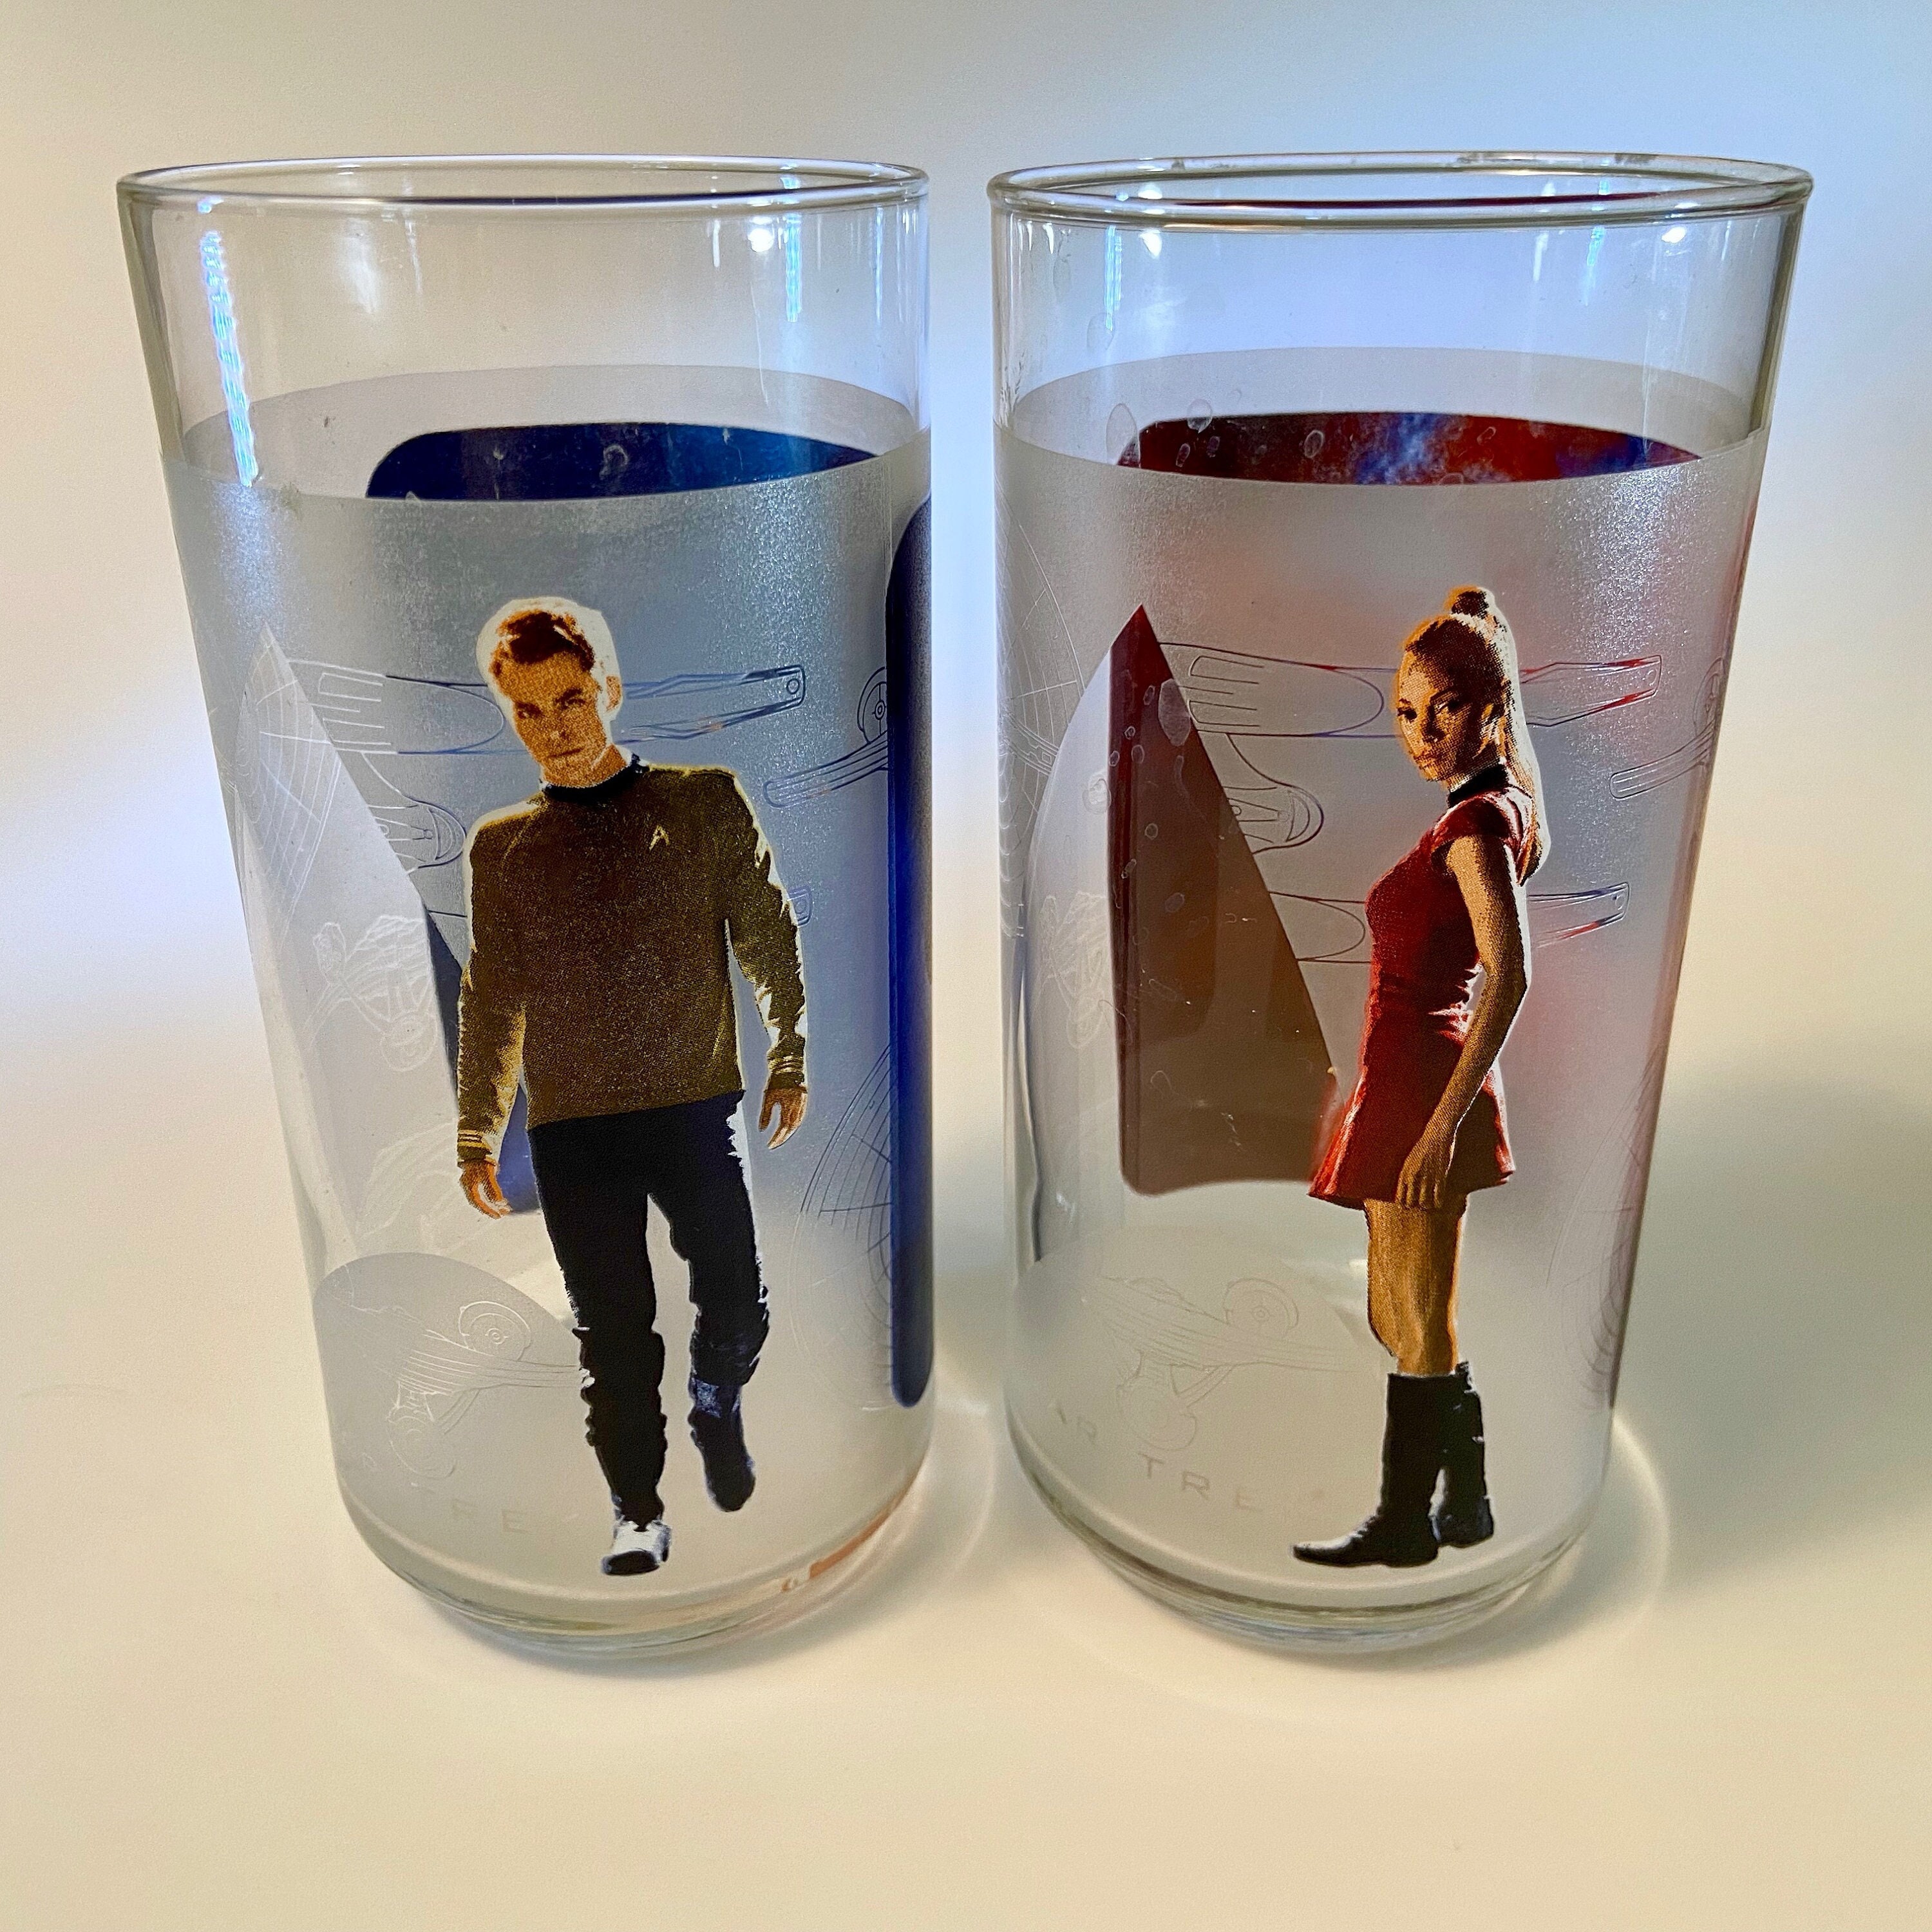 NEW BOXED! Set of 4 STAR TREK COLLECTIBLE GLASSES 2009 